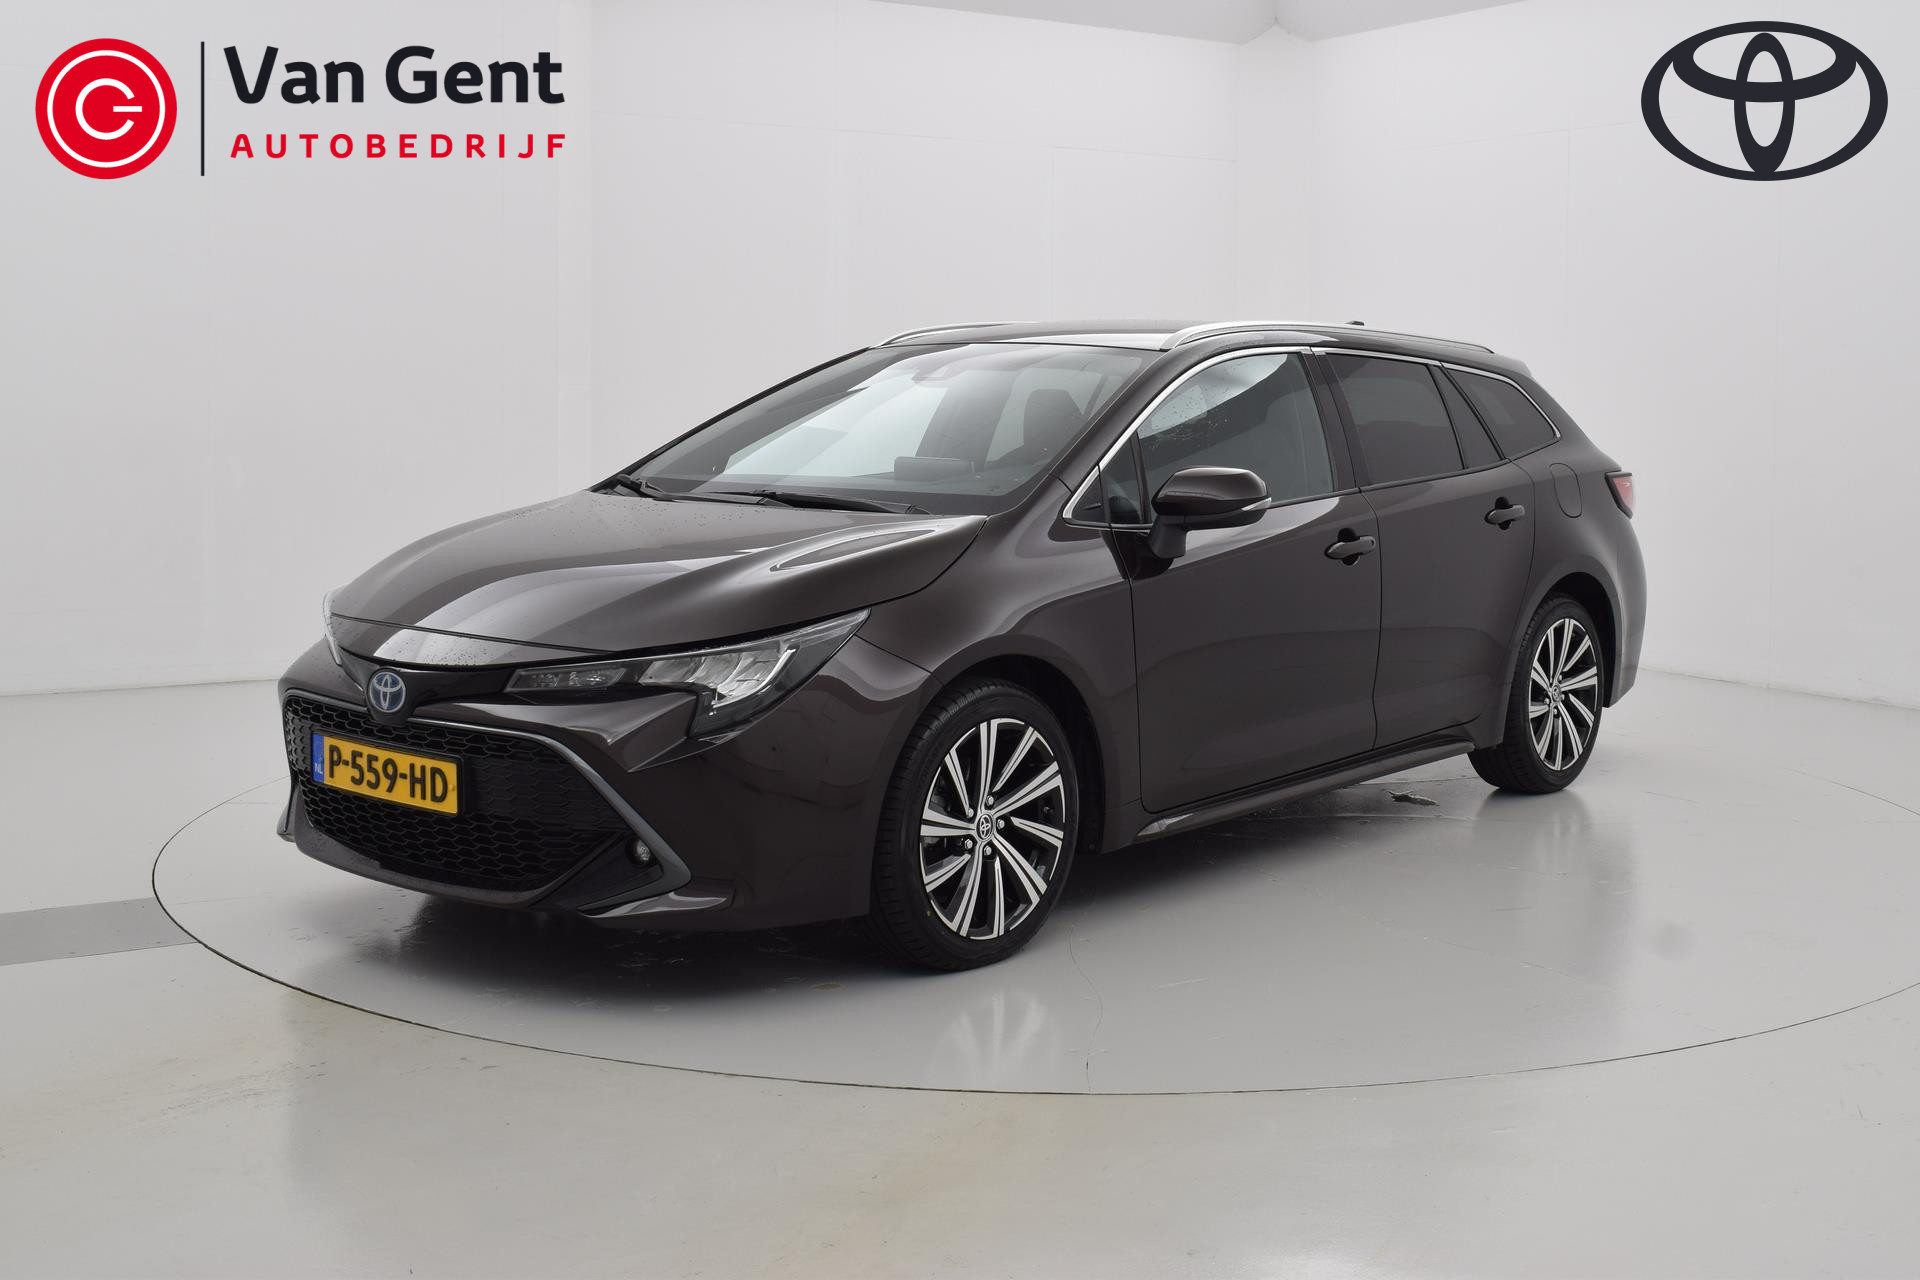 Toyota Corolla Touring Sports 1.8 Hybrid Dynamic Apple\Android Automaat bij viaBOVAG.nl